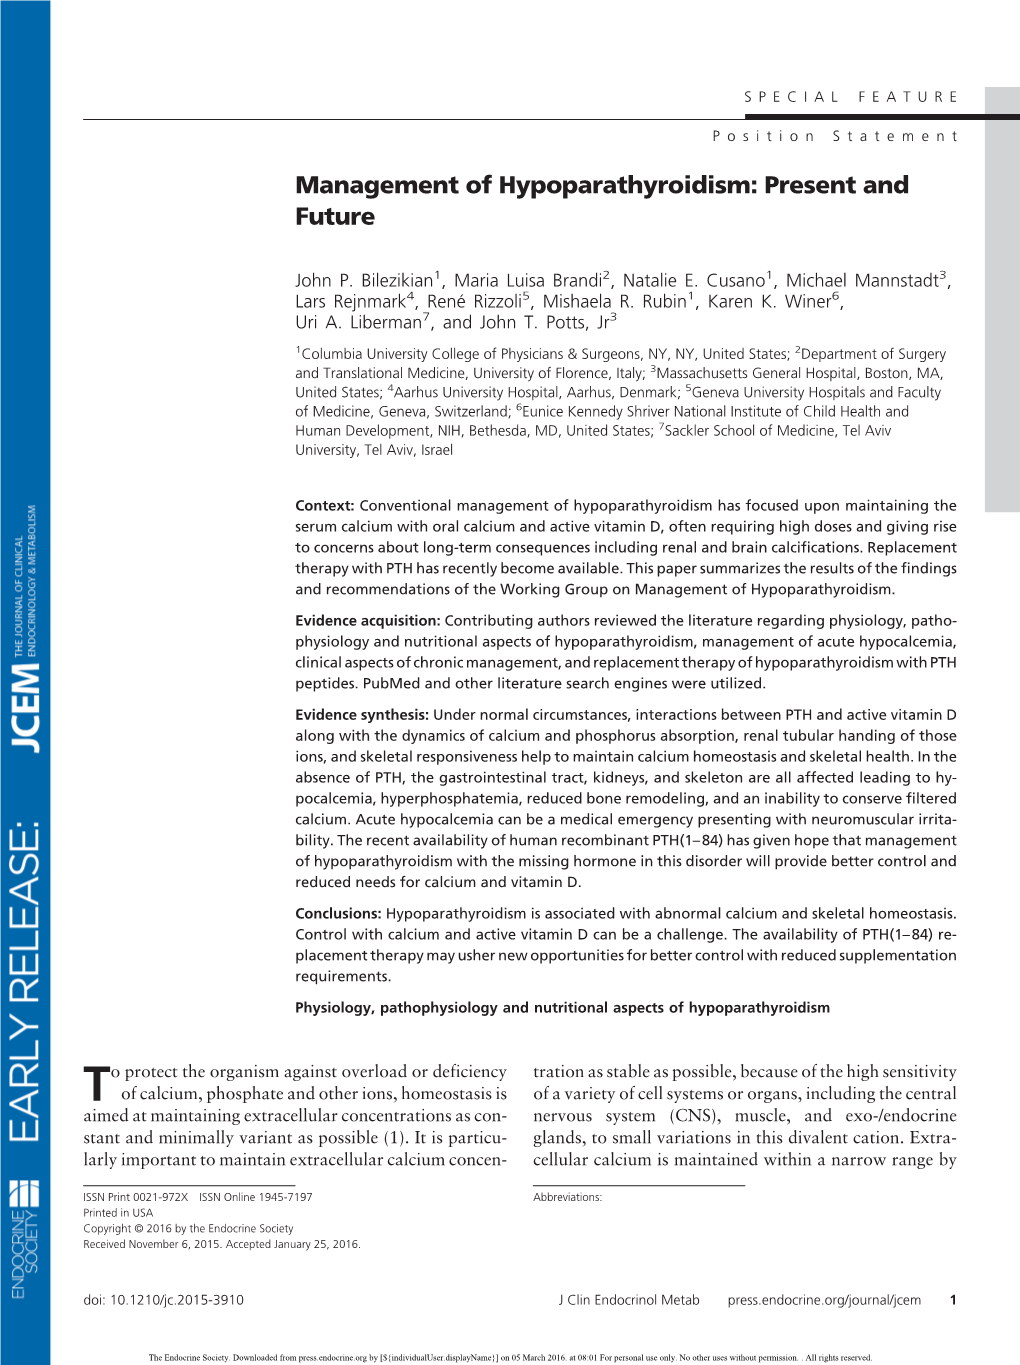 Management of Hypoparathyroidism: Present and Future